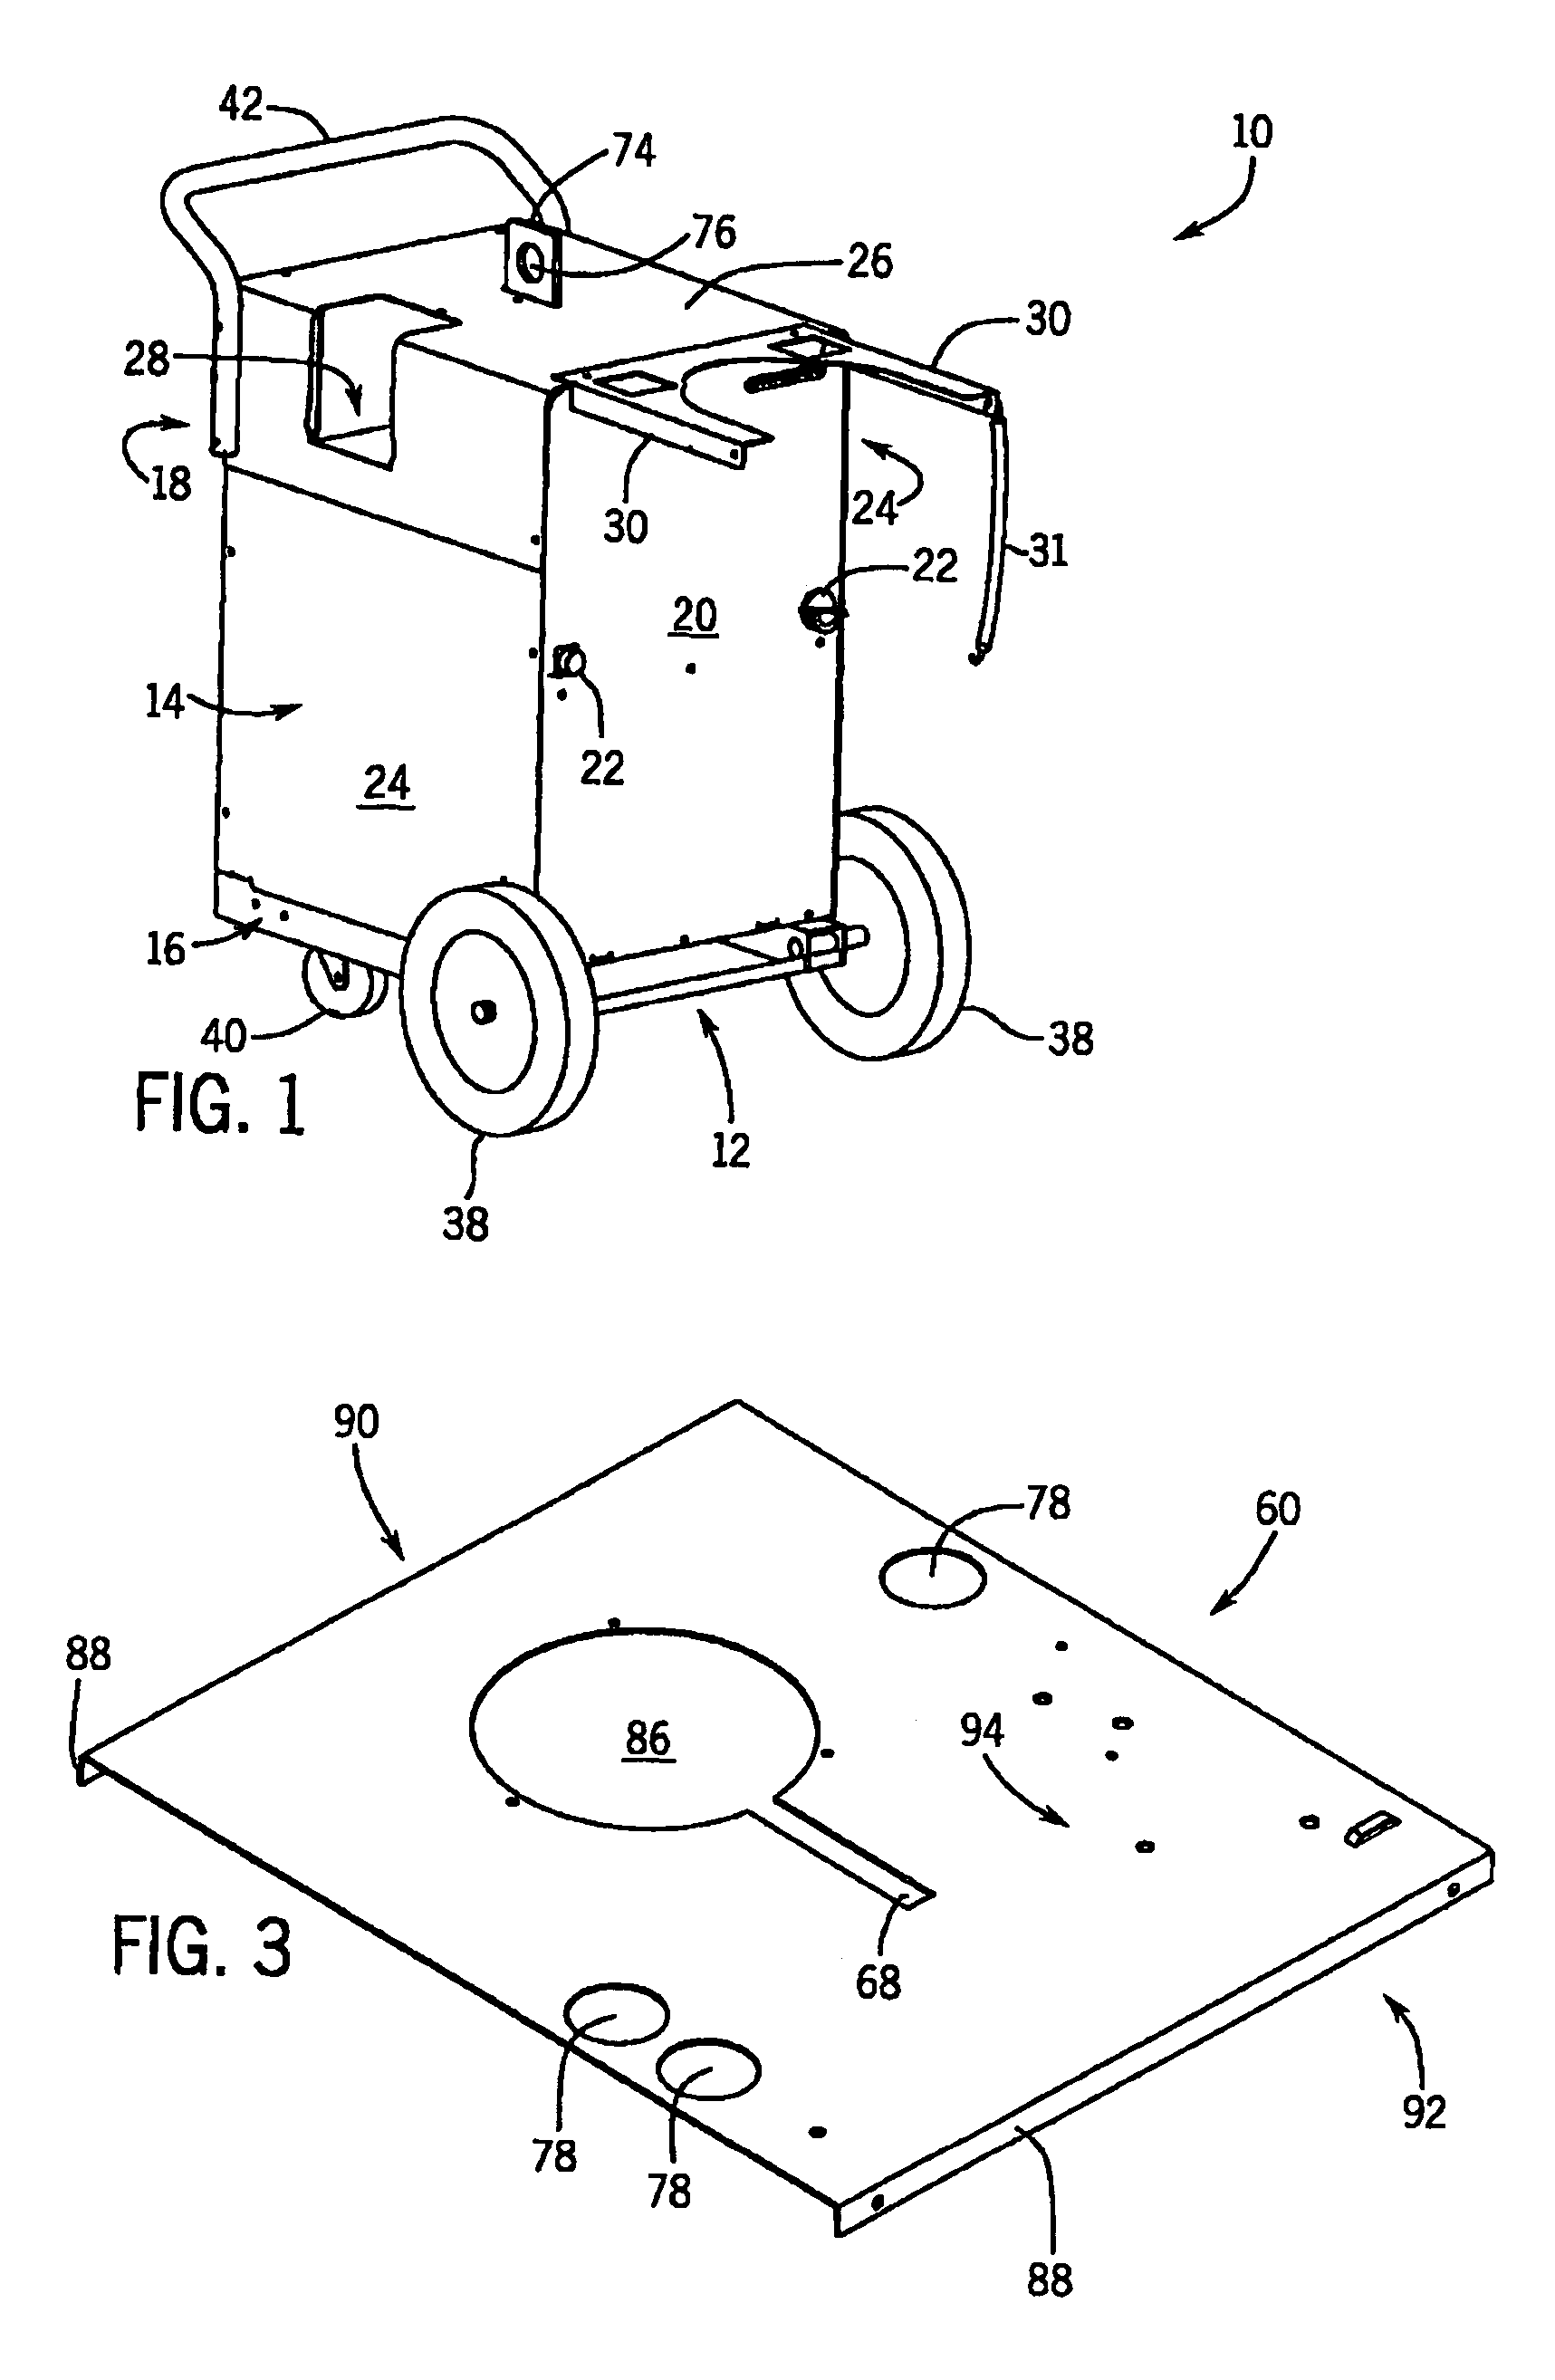 Apparatus for a welding machine having a cooling assembly mounted to a mid-plane baffle for improved cooling within the welding machine